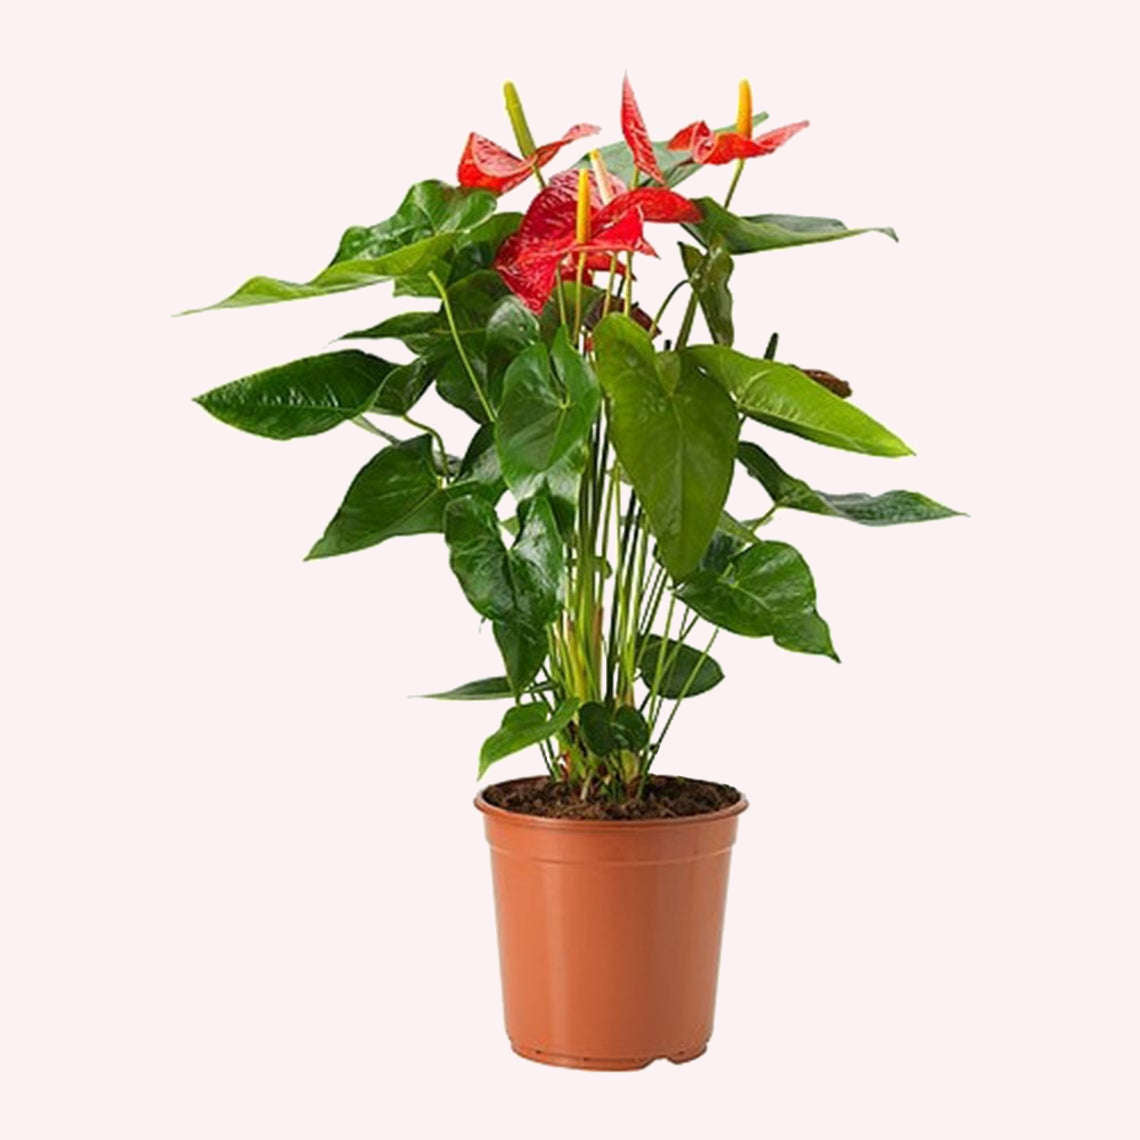 Anthurium Red plant in a 6" pot.